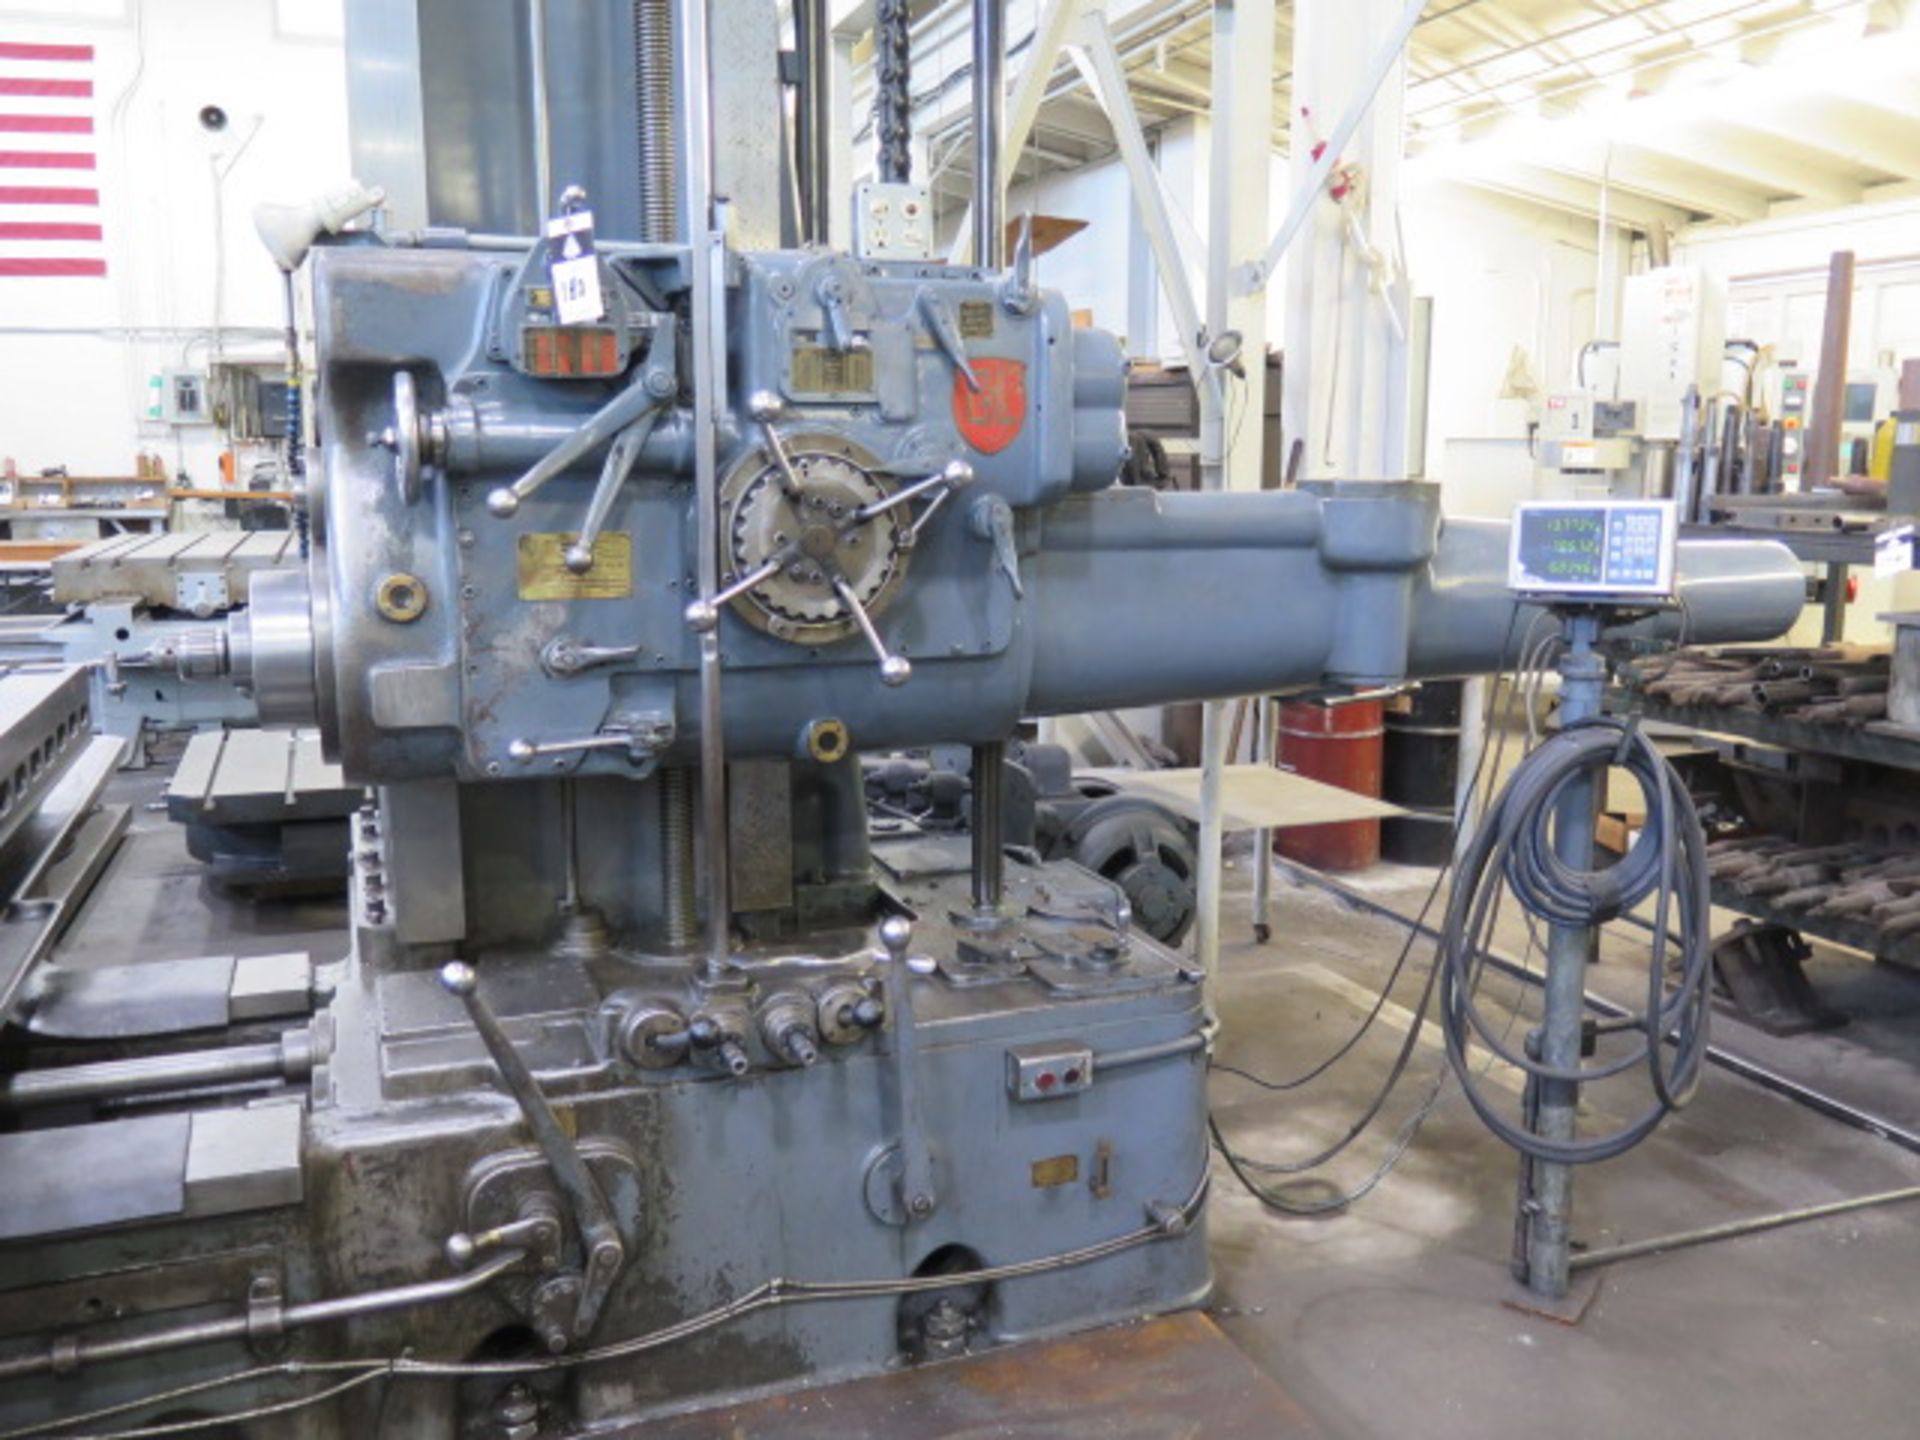 Giddings & Lewis 350-T Horizontal Boring Mill s/n 5182 w/ Fagor Innova 3-Axis DRO, SOLD AS IS - Image 4 of 11